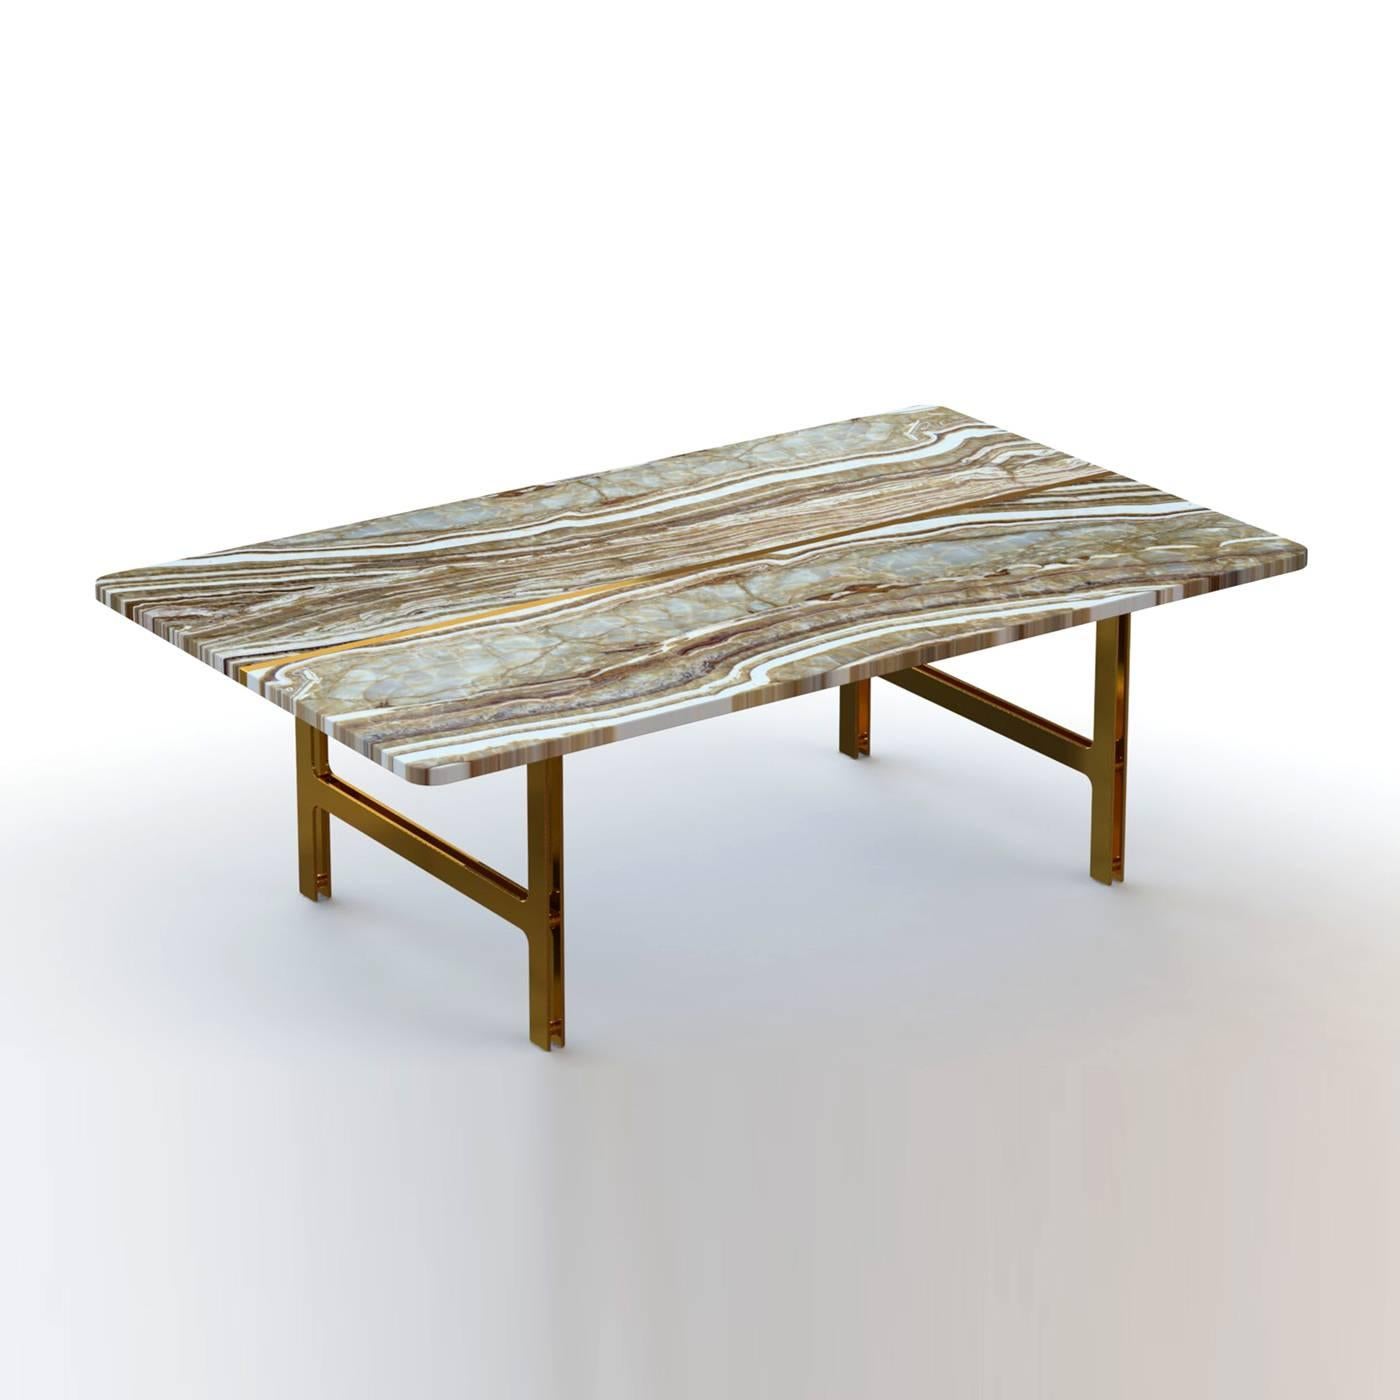 This elegant coffee table features a magnificent top comprised of two slabs of Italian tiger onyx with their striking veins that run vertically across the top, joined together with a brass element that accentuates the geometric silhouette of this